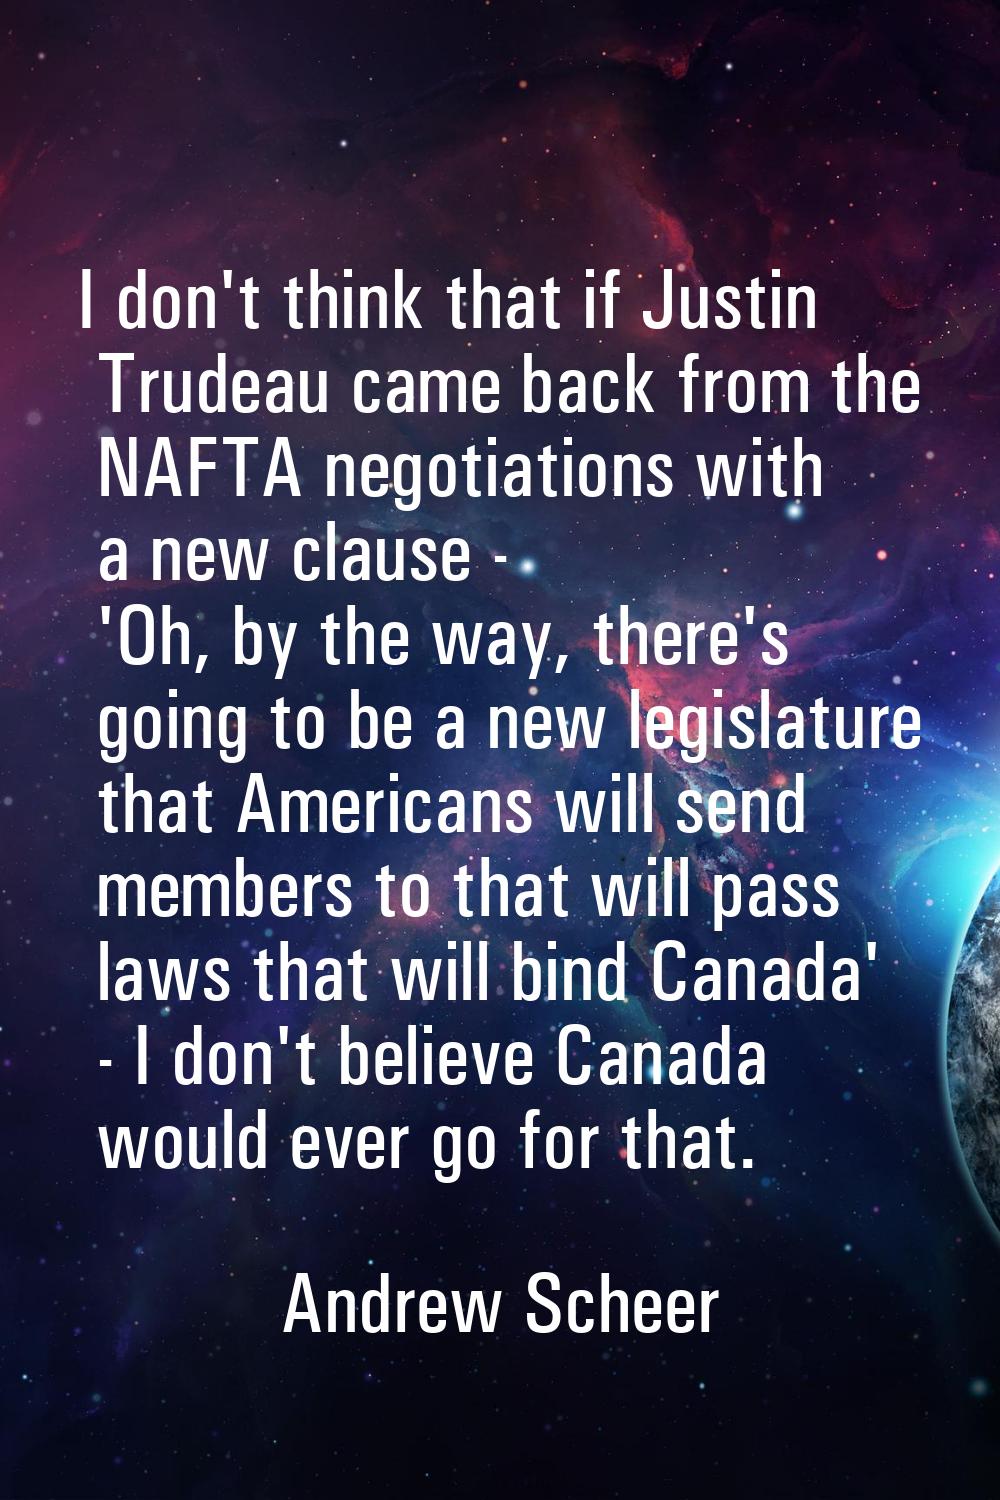 I don't think that if Justin Trudeau came back from the NAFTA negotiations with a new clause - 'Oh,